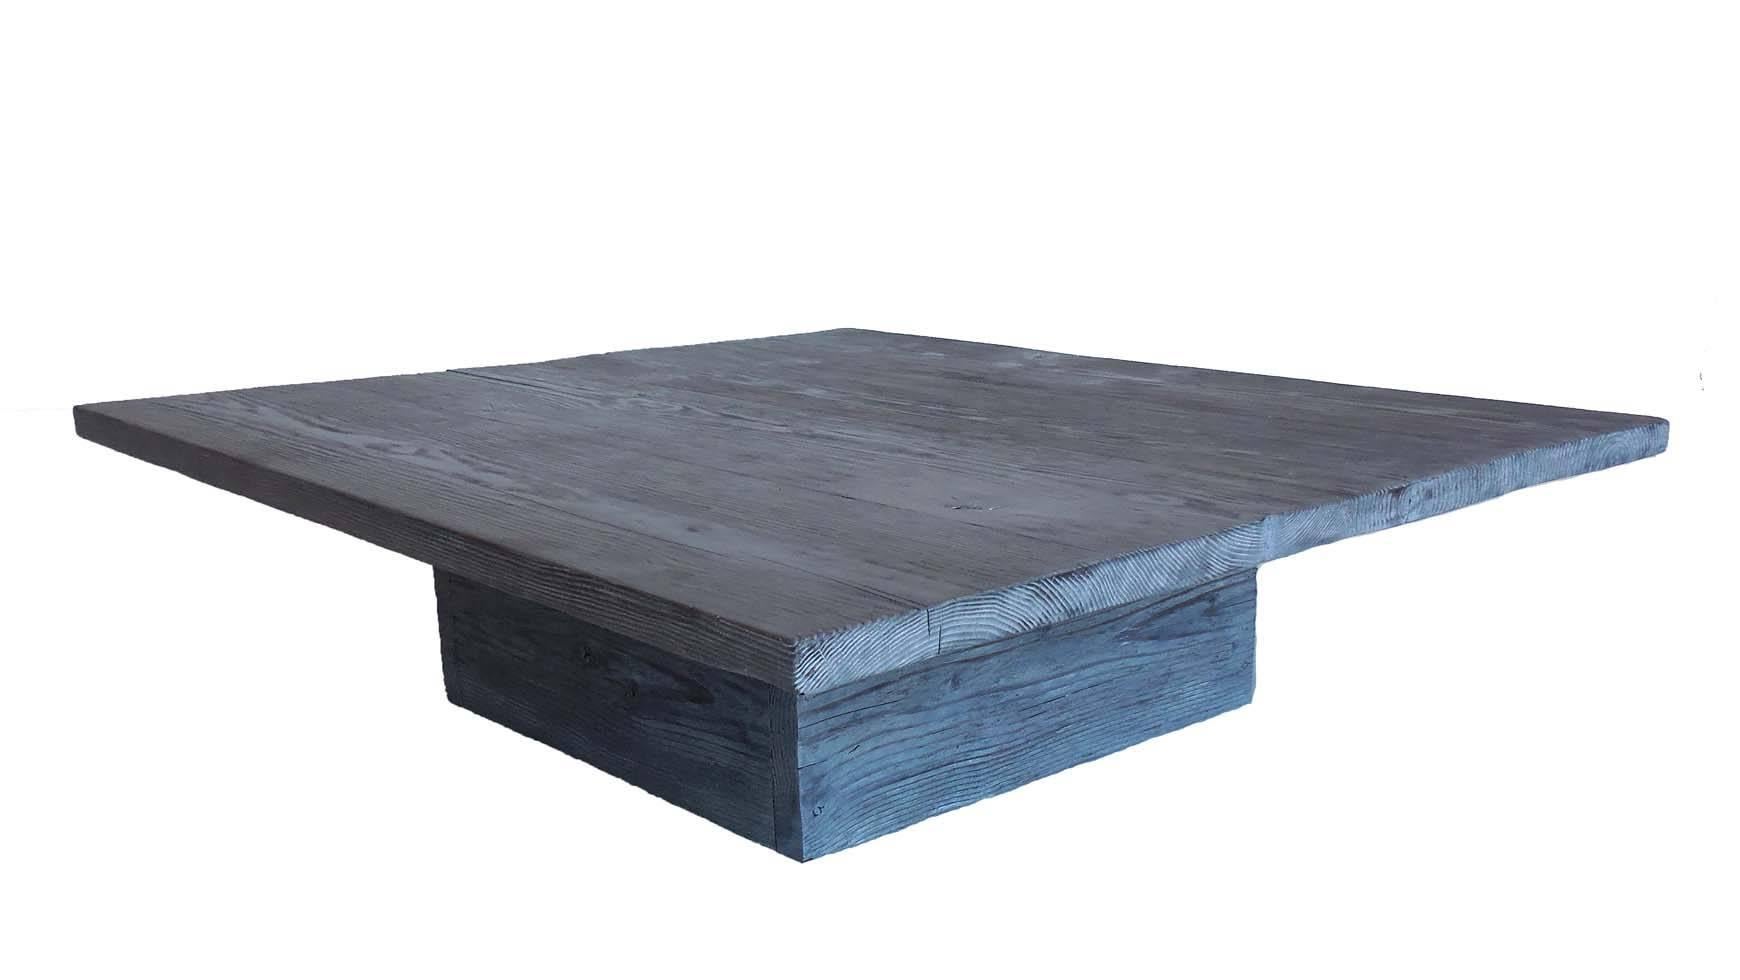 Dark ceruse wood with tones of grey, brown and black. Geometric, clean design with a interesting dark and light finish. Reclaimed wood.
Can be made in custom sizes and finishes. Made in Los Angeles by Dos Gallos Studio. Please inquire for custom